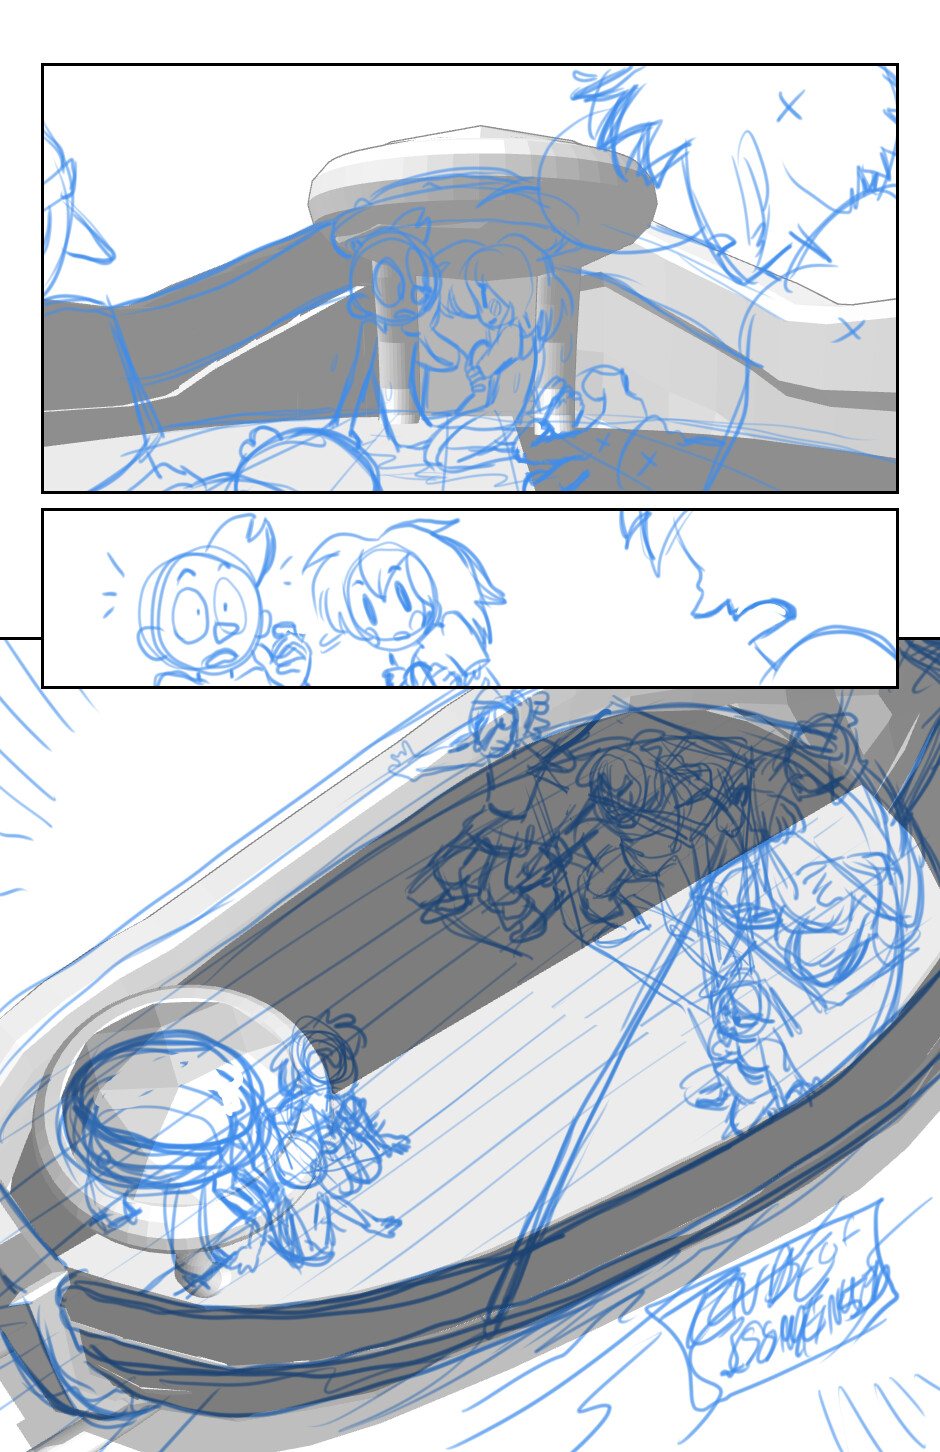 page 43 pencils - The reference model's engine was too large for this shot so I adjusted it